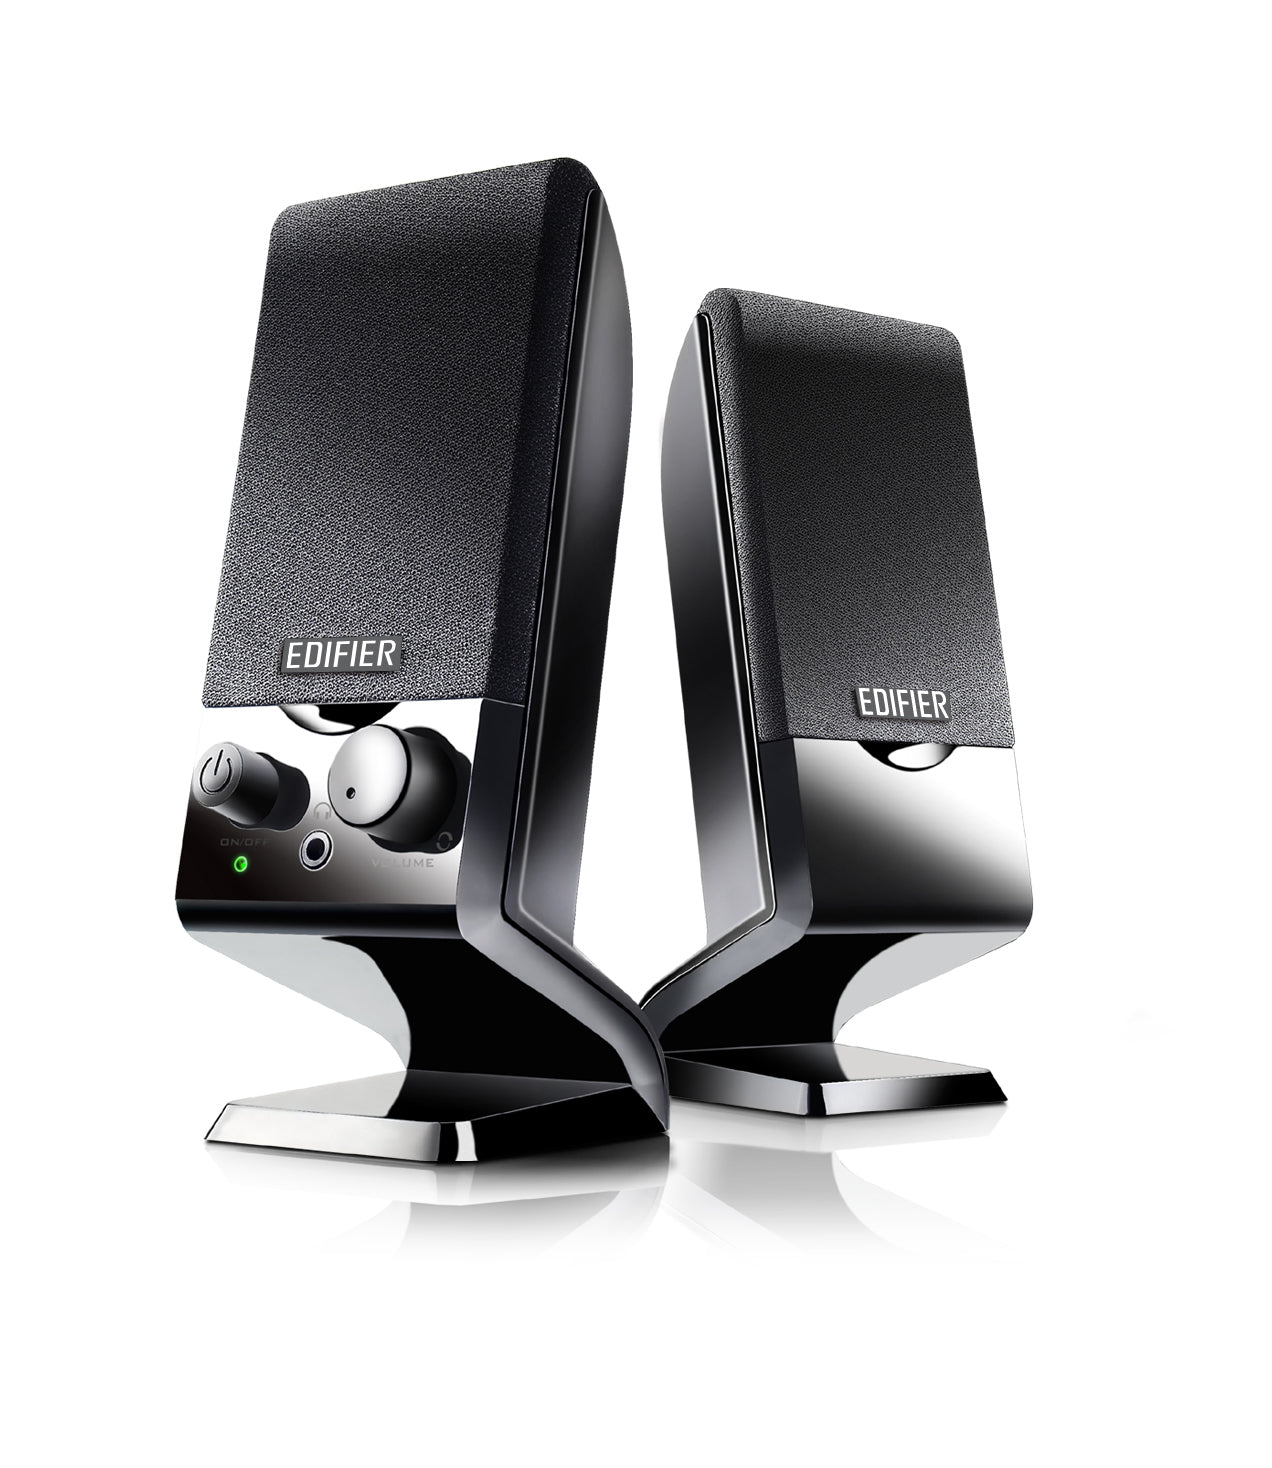 Edifier M1250 Compact 2.0 Flat Panel PC Speakers